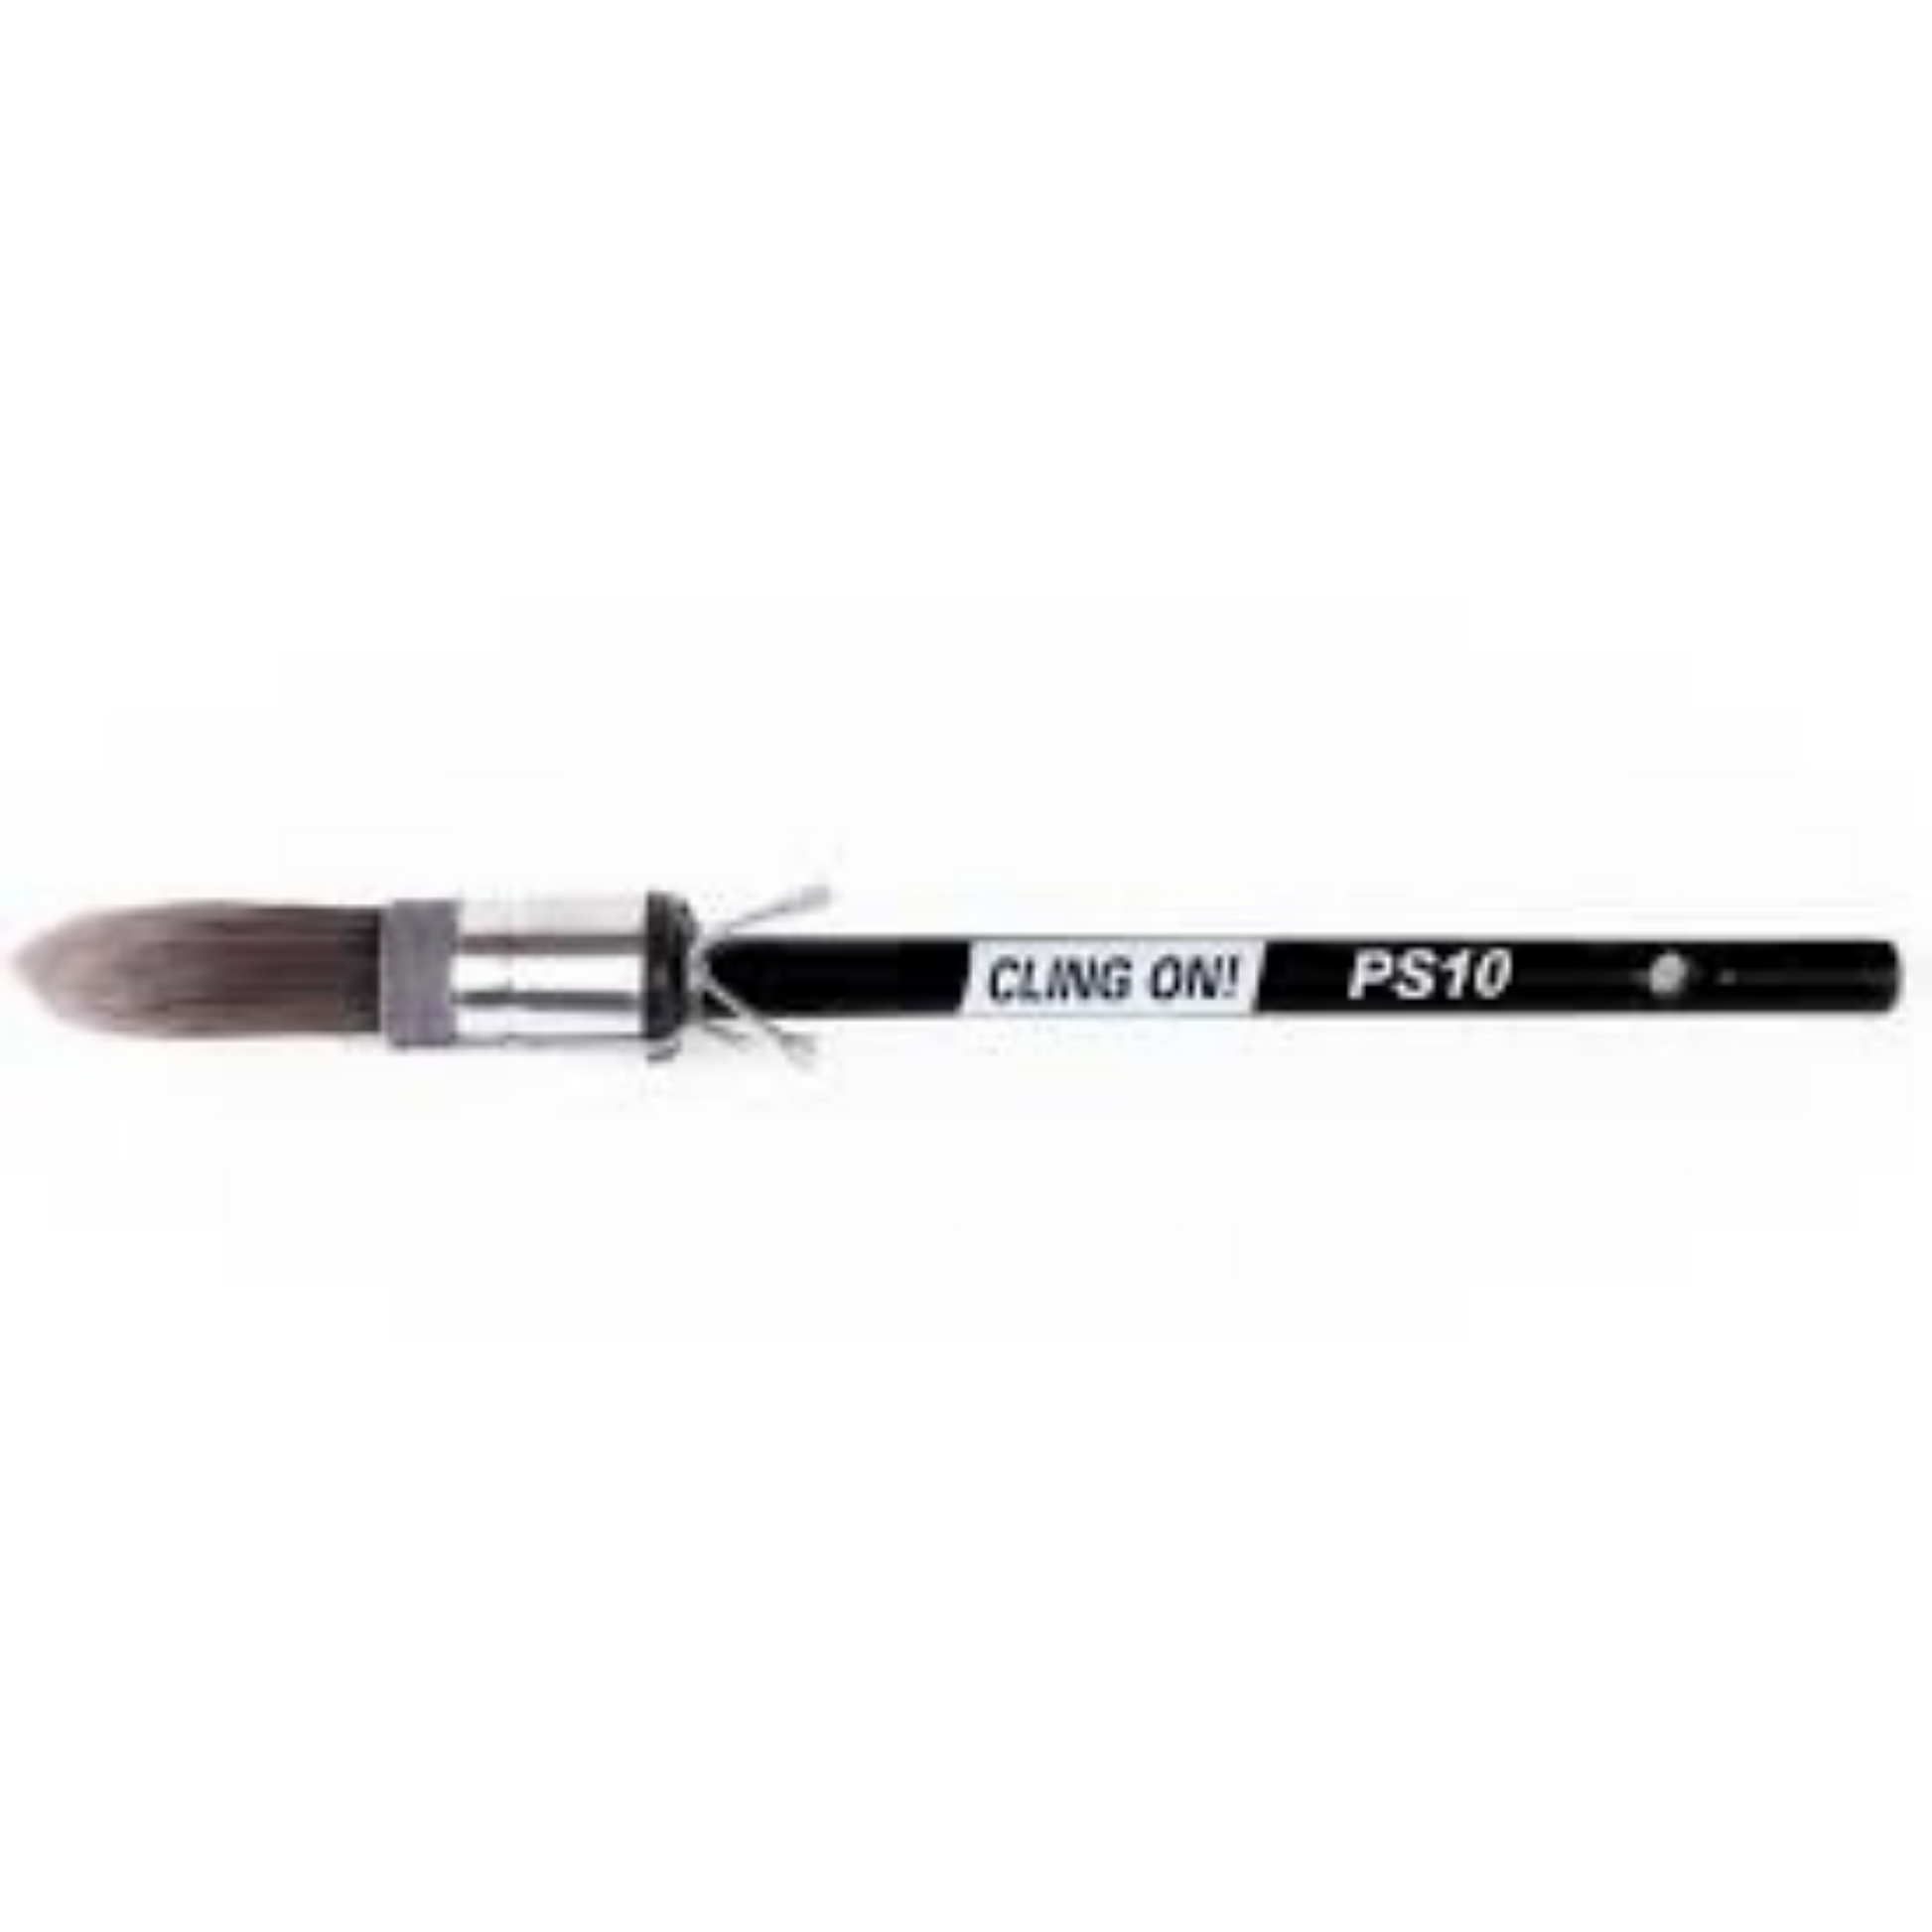 PS10 Pointy Sister brush by Cling On! Brushes available at Milton's Daughter